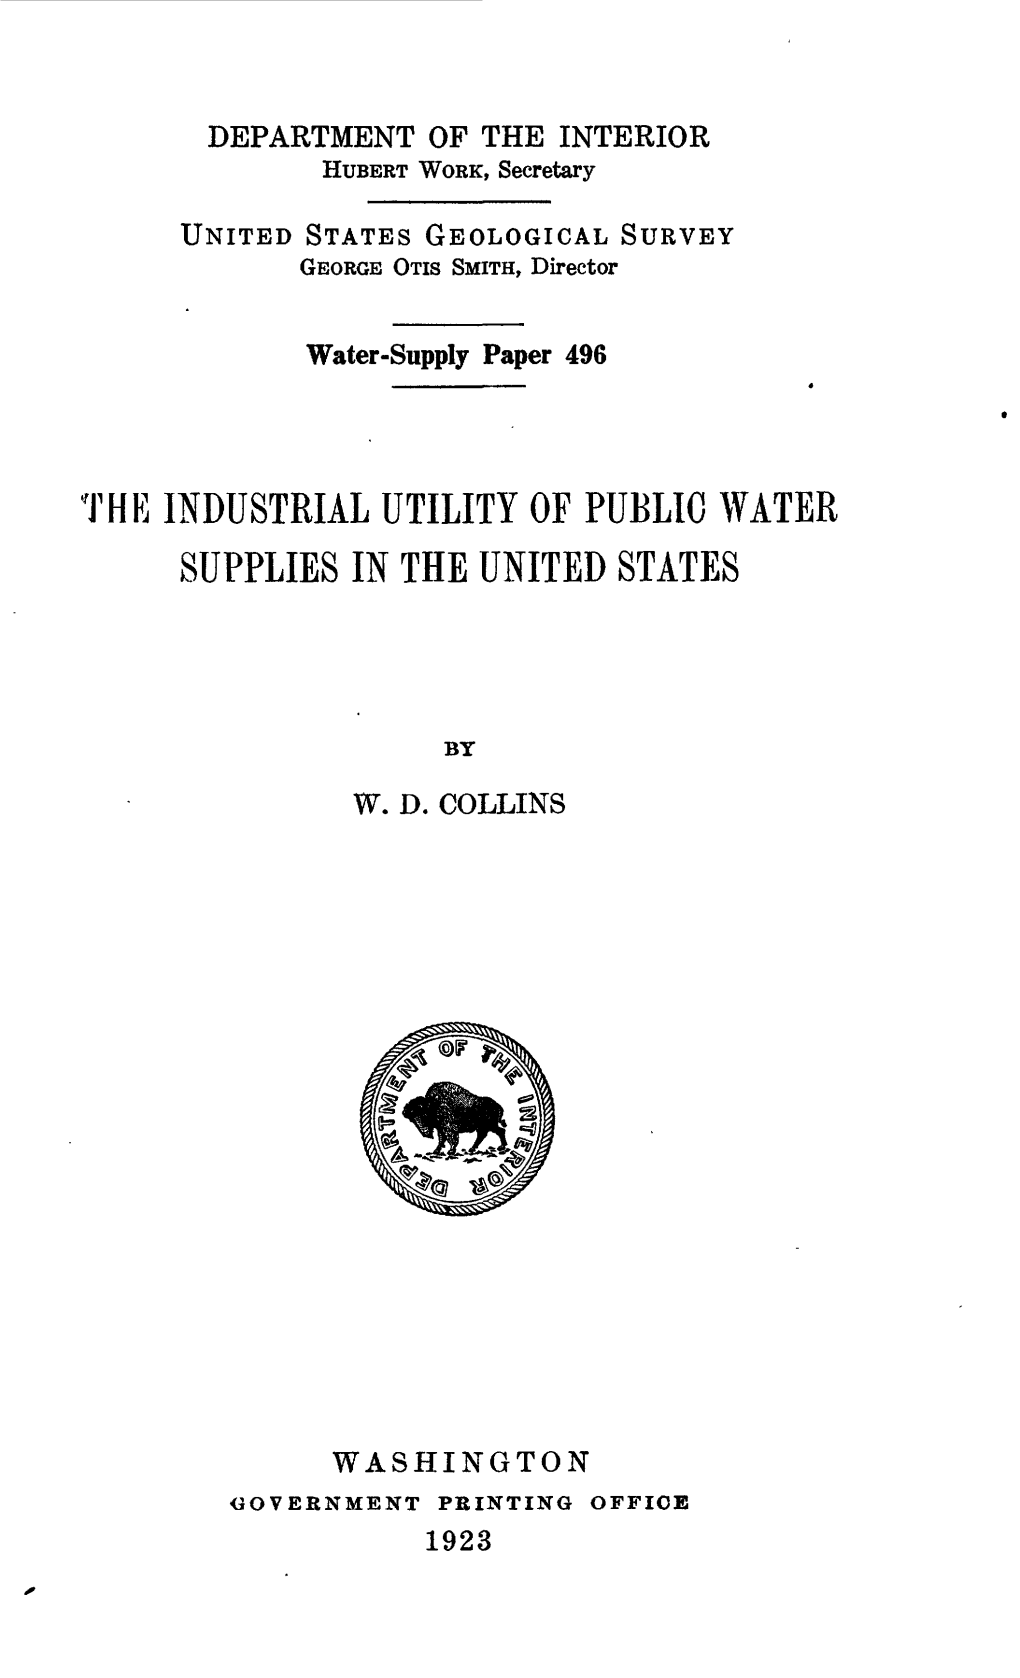 The Industrial Utility of Public Water Supplies in the United States